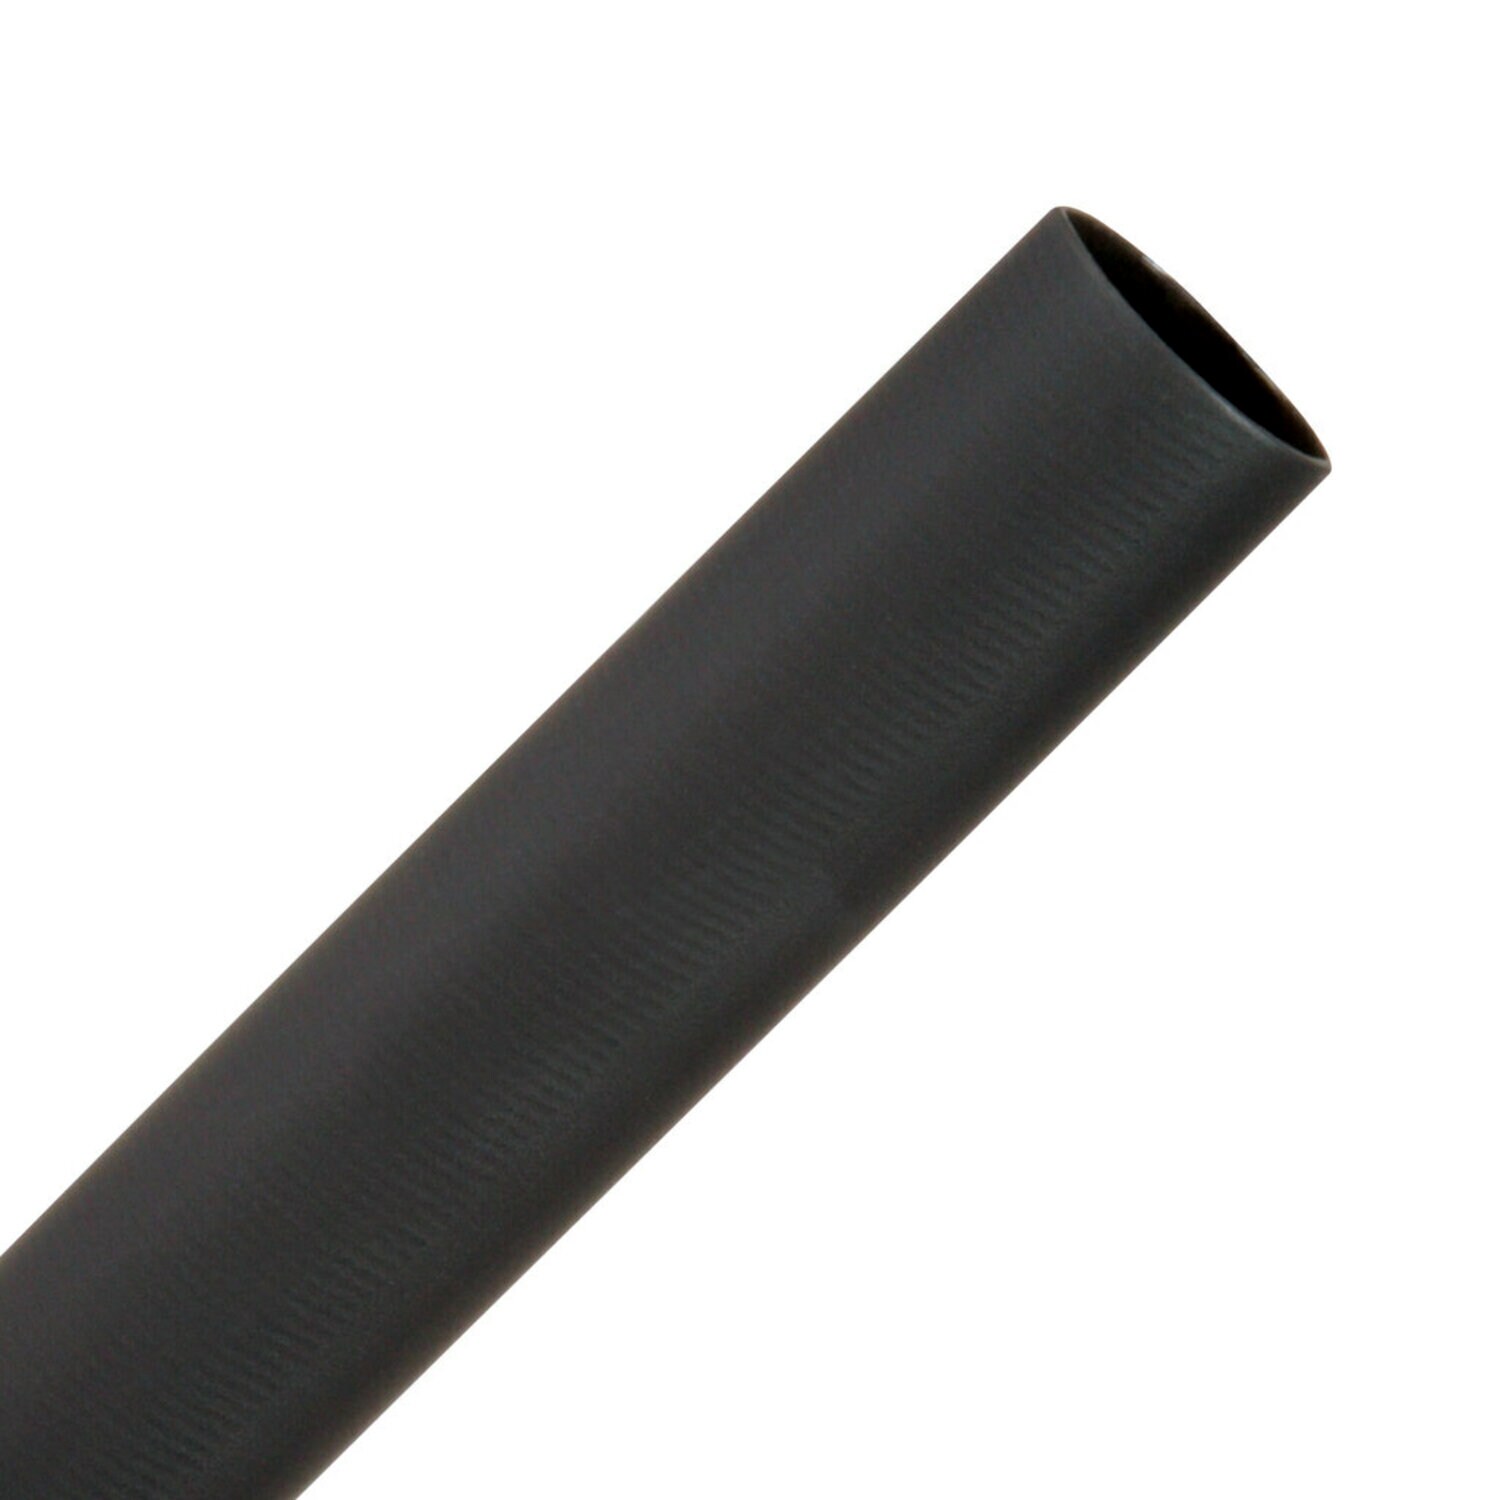 7010350122 - 3M Thin-Wall Heat Shrink Tubing EPS-300, Adhesive-Lined, 1/2" Black
1-1/2-in piece, 4800/Case